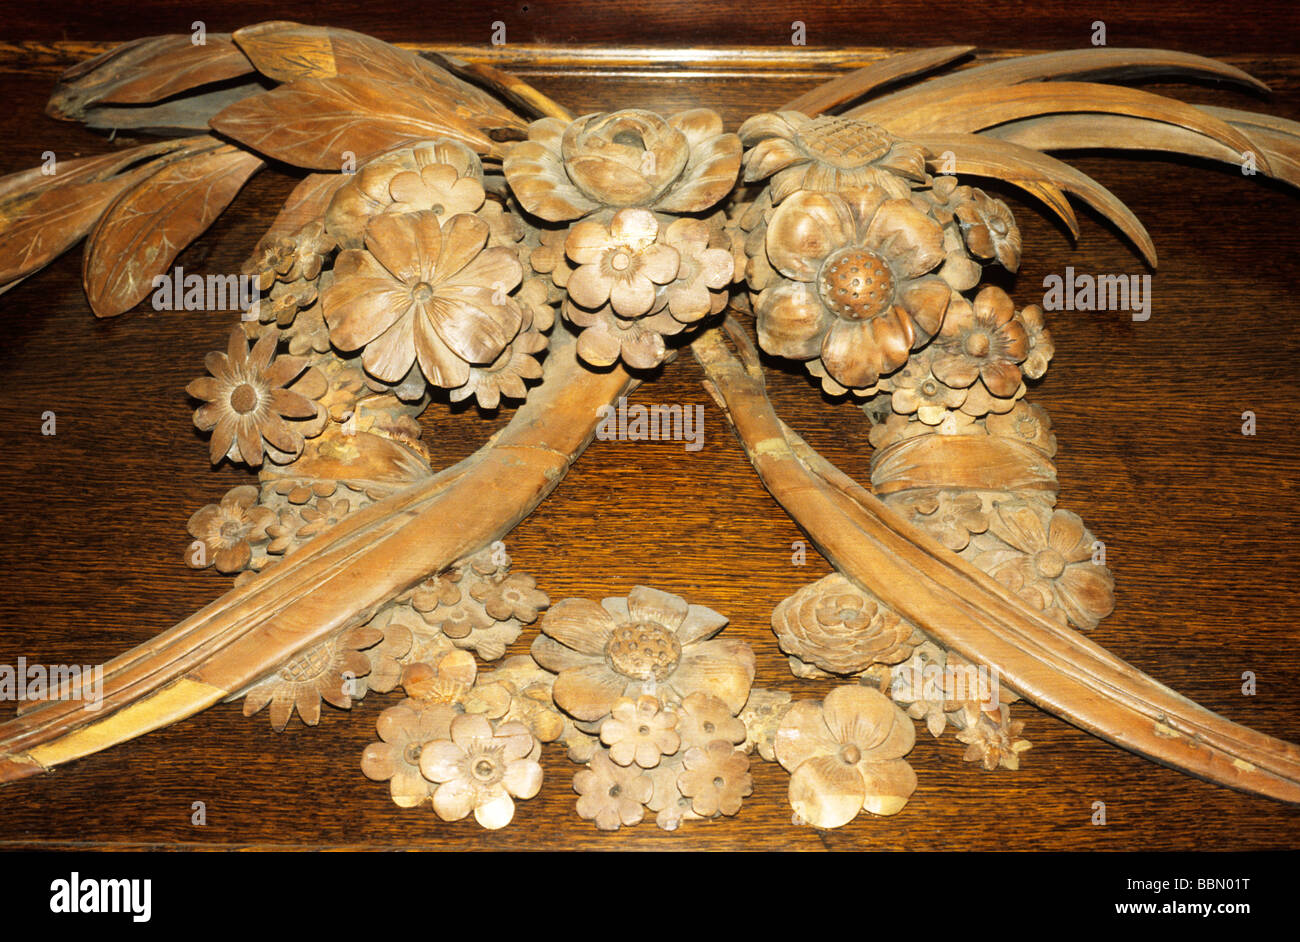 Woodcarving by Grinling Gibbons St Paul's Church Covent Garden memorial wreath in wood English woodworker carver London England Stock Photo